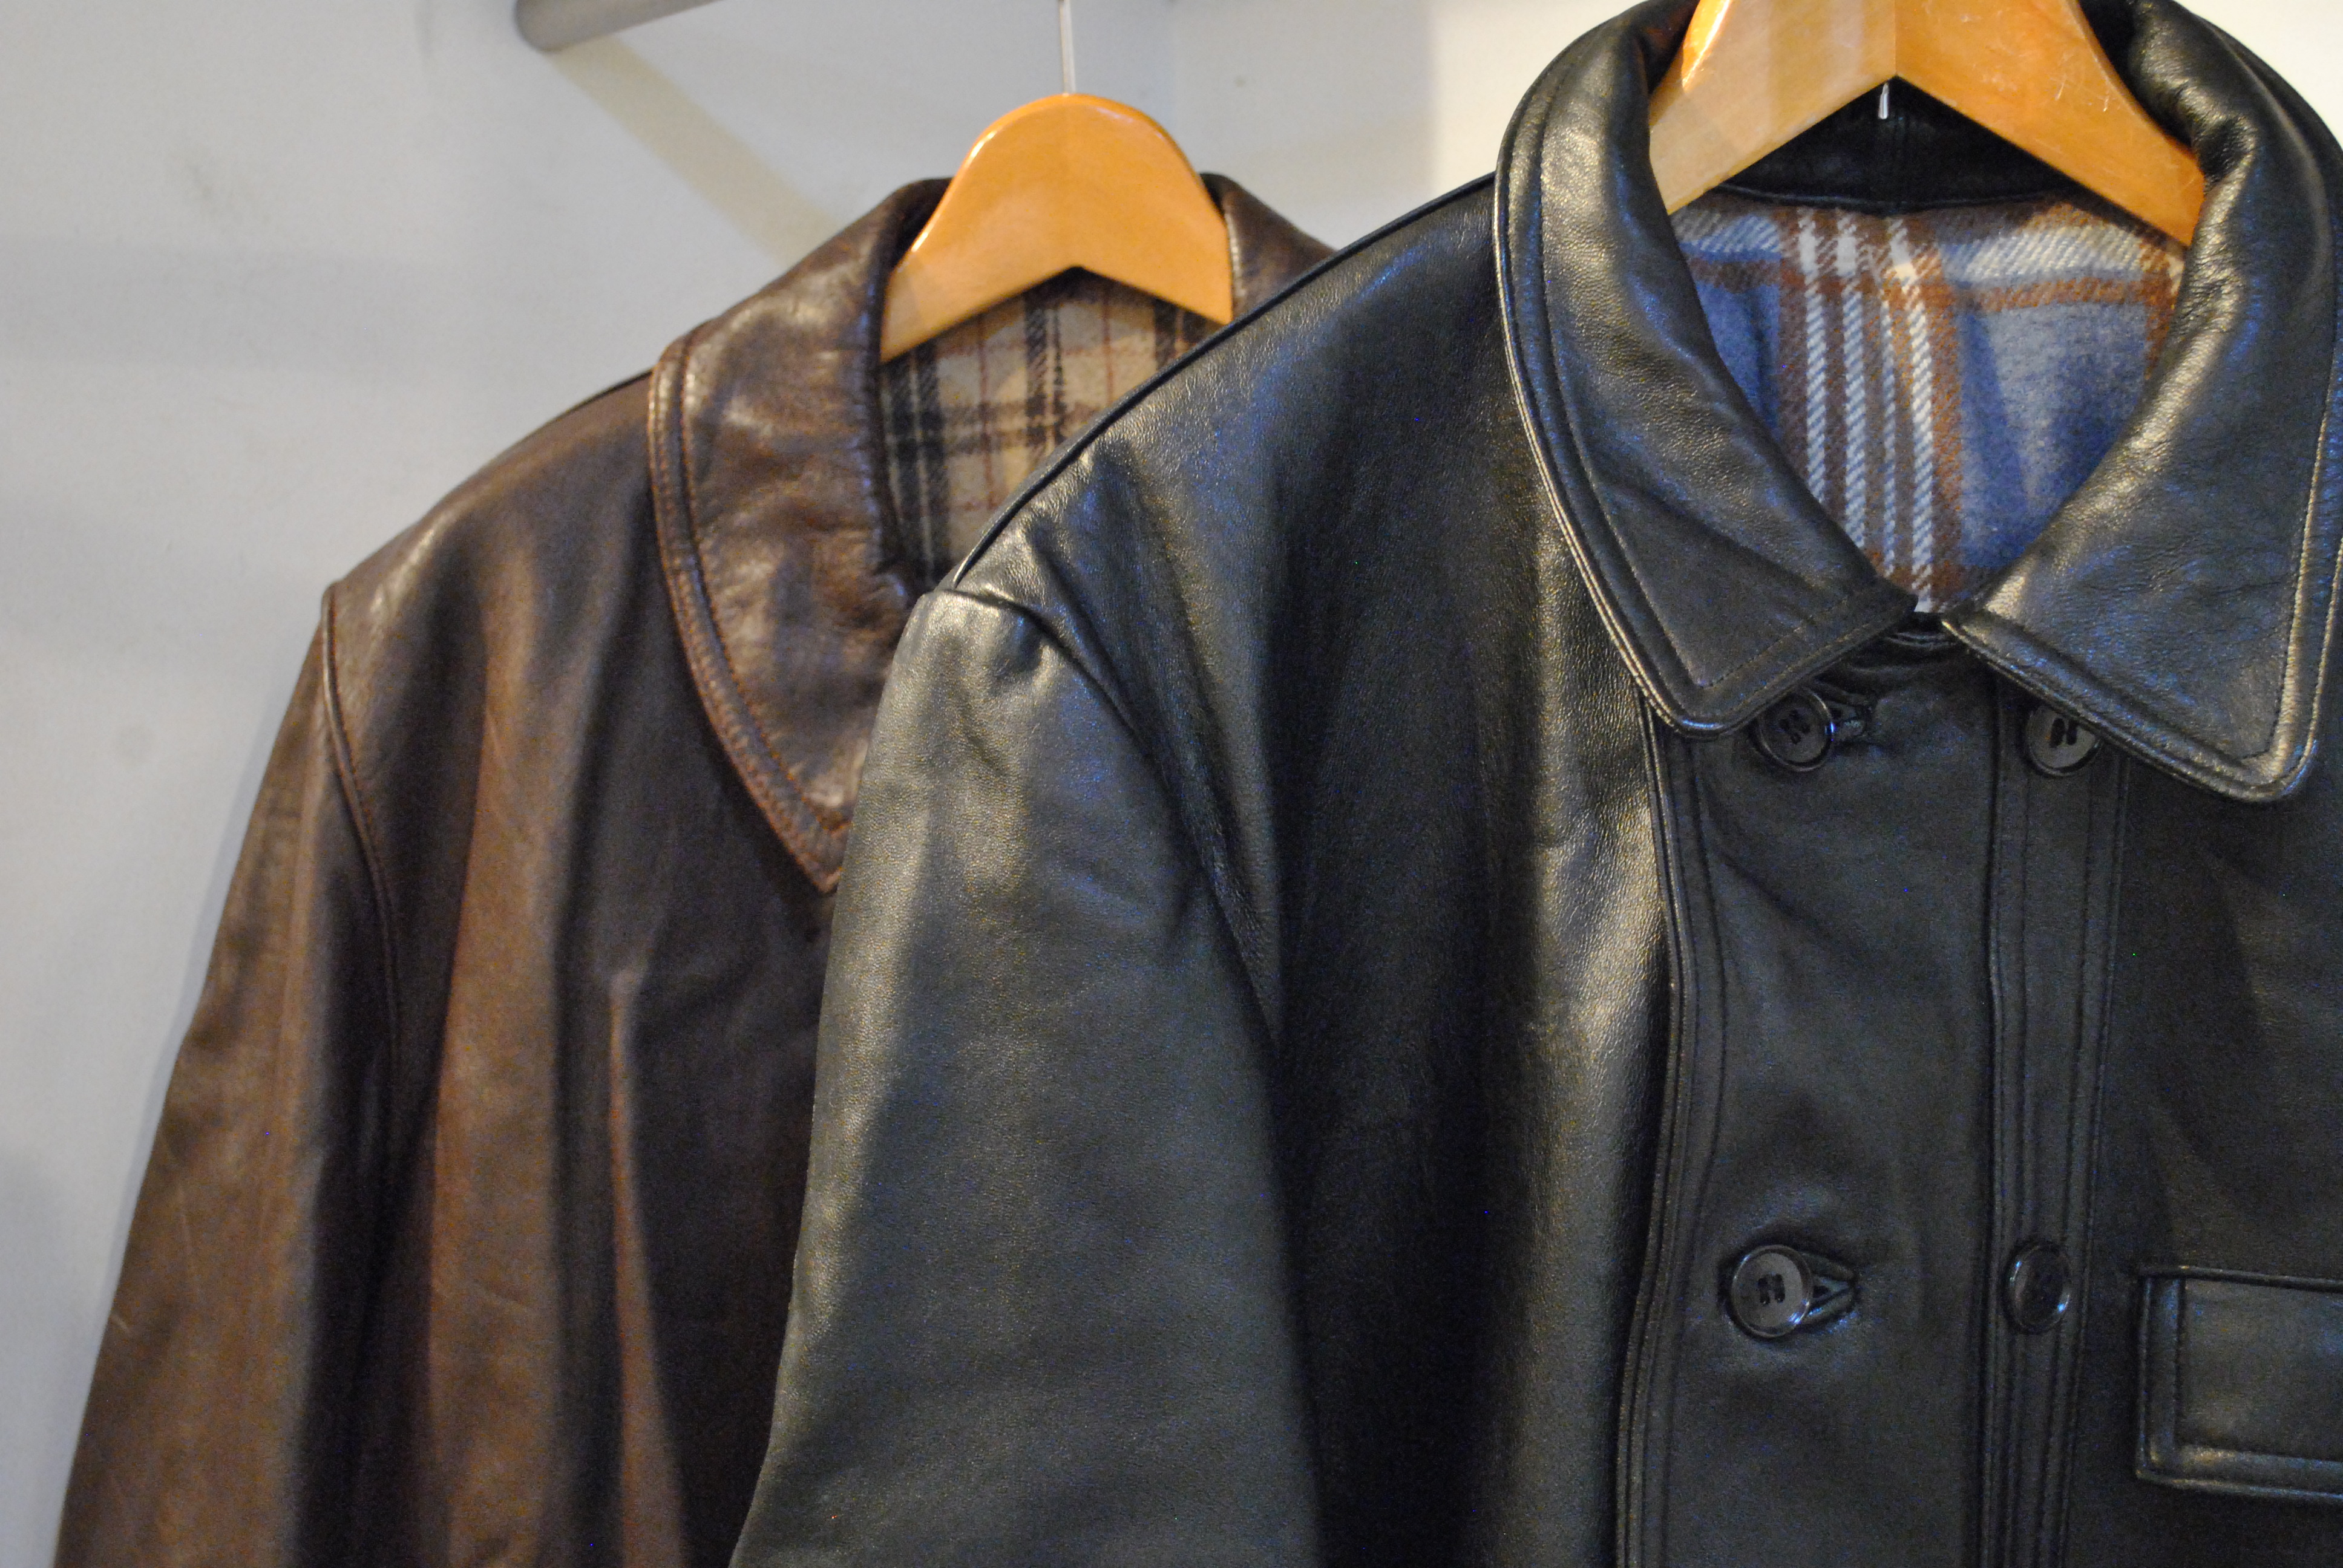 「French Corbusier jacket E.D.F leatherjacket」 - CROUT